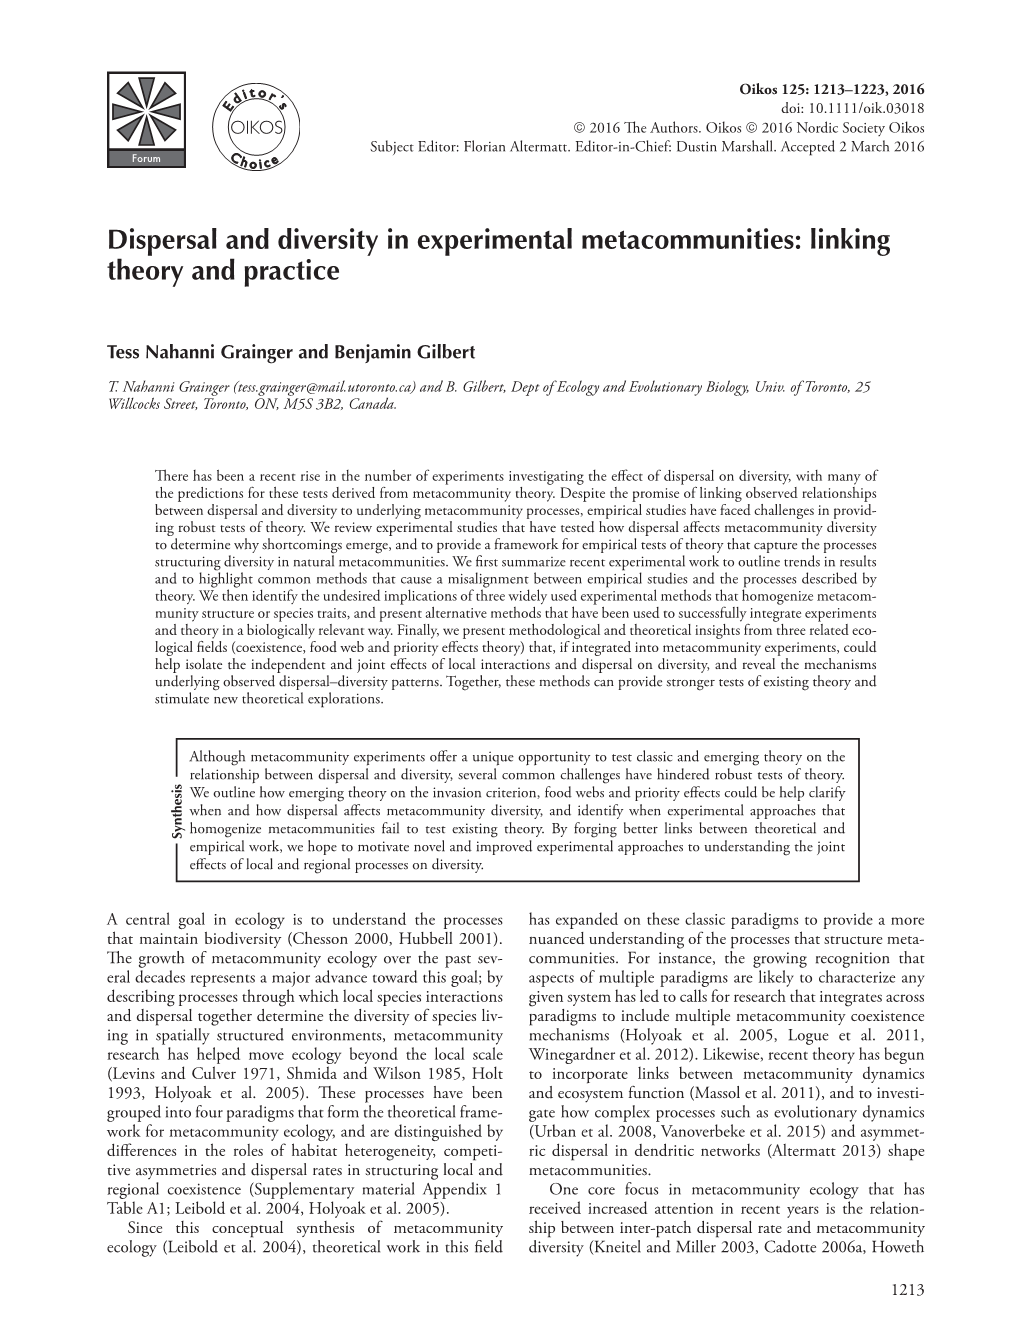 Dispersal and Diversity in Experimental Metacommunities: Linking Theory and Practice